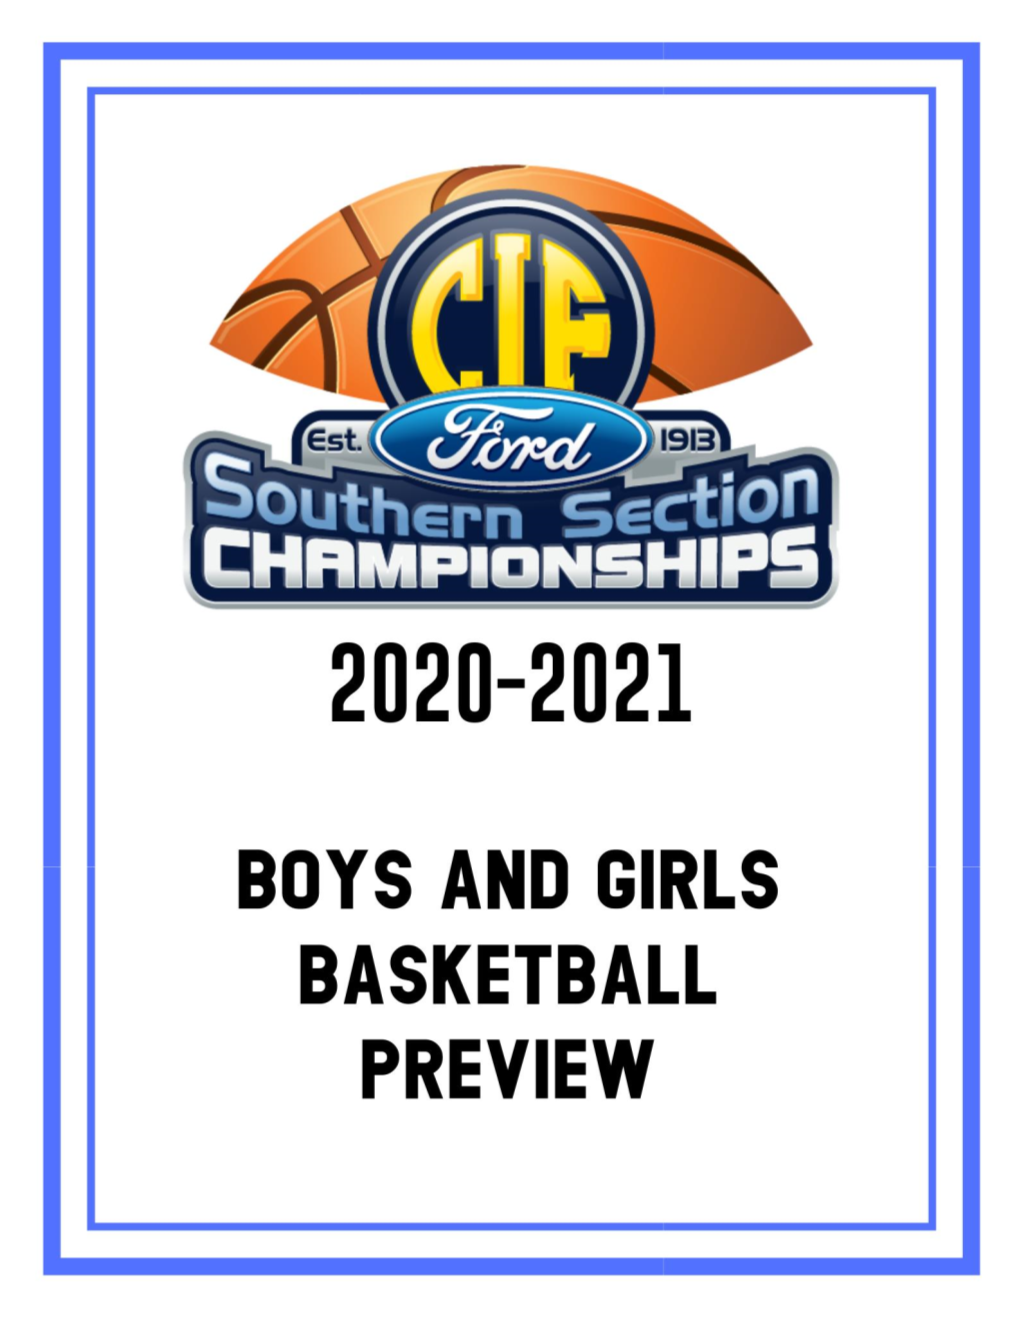 Table of Contents – Basketball 2020-2021